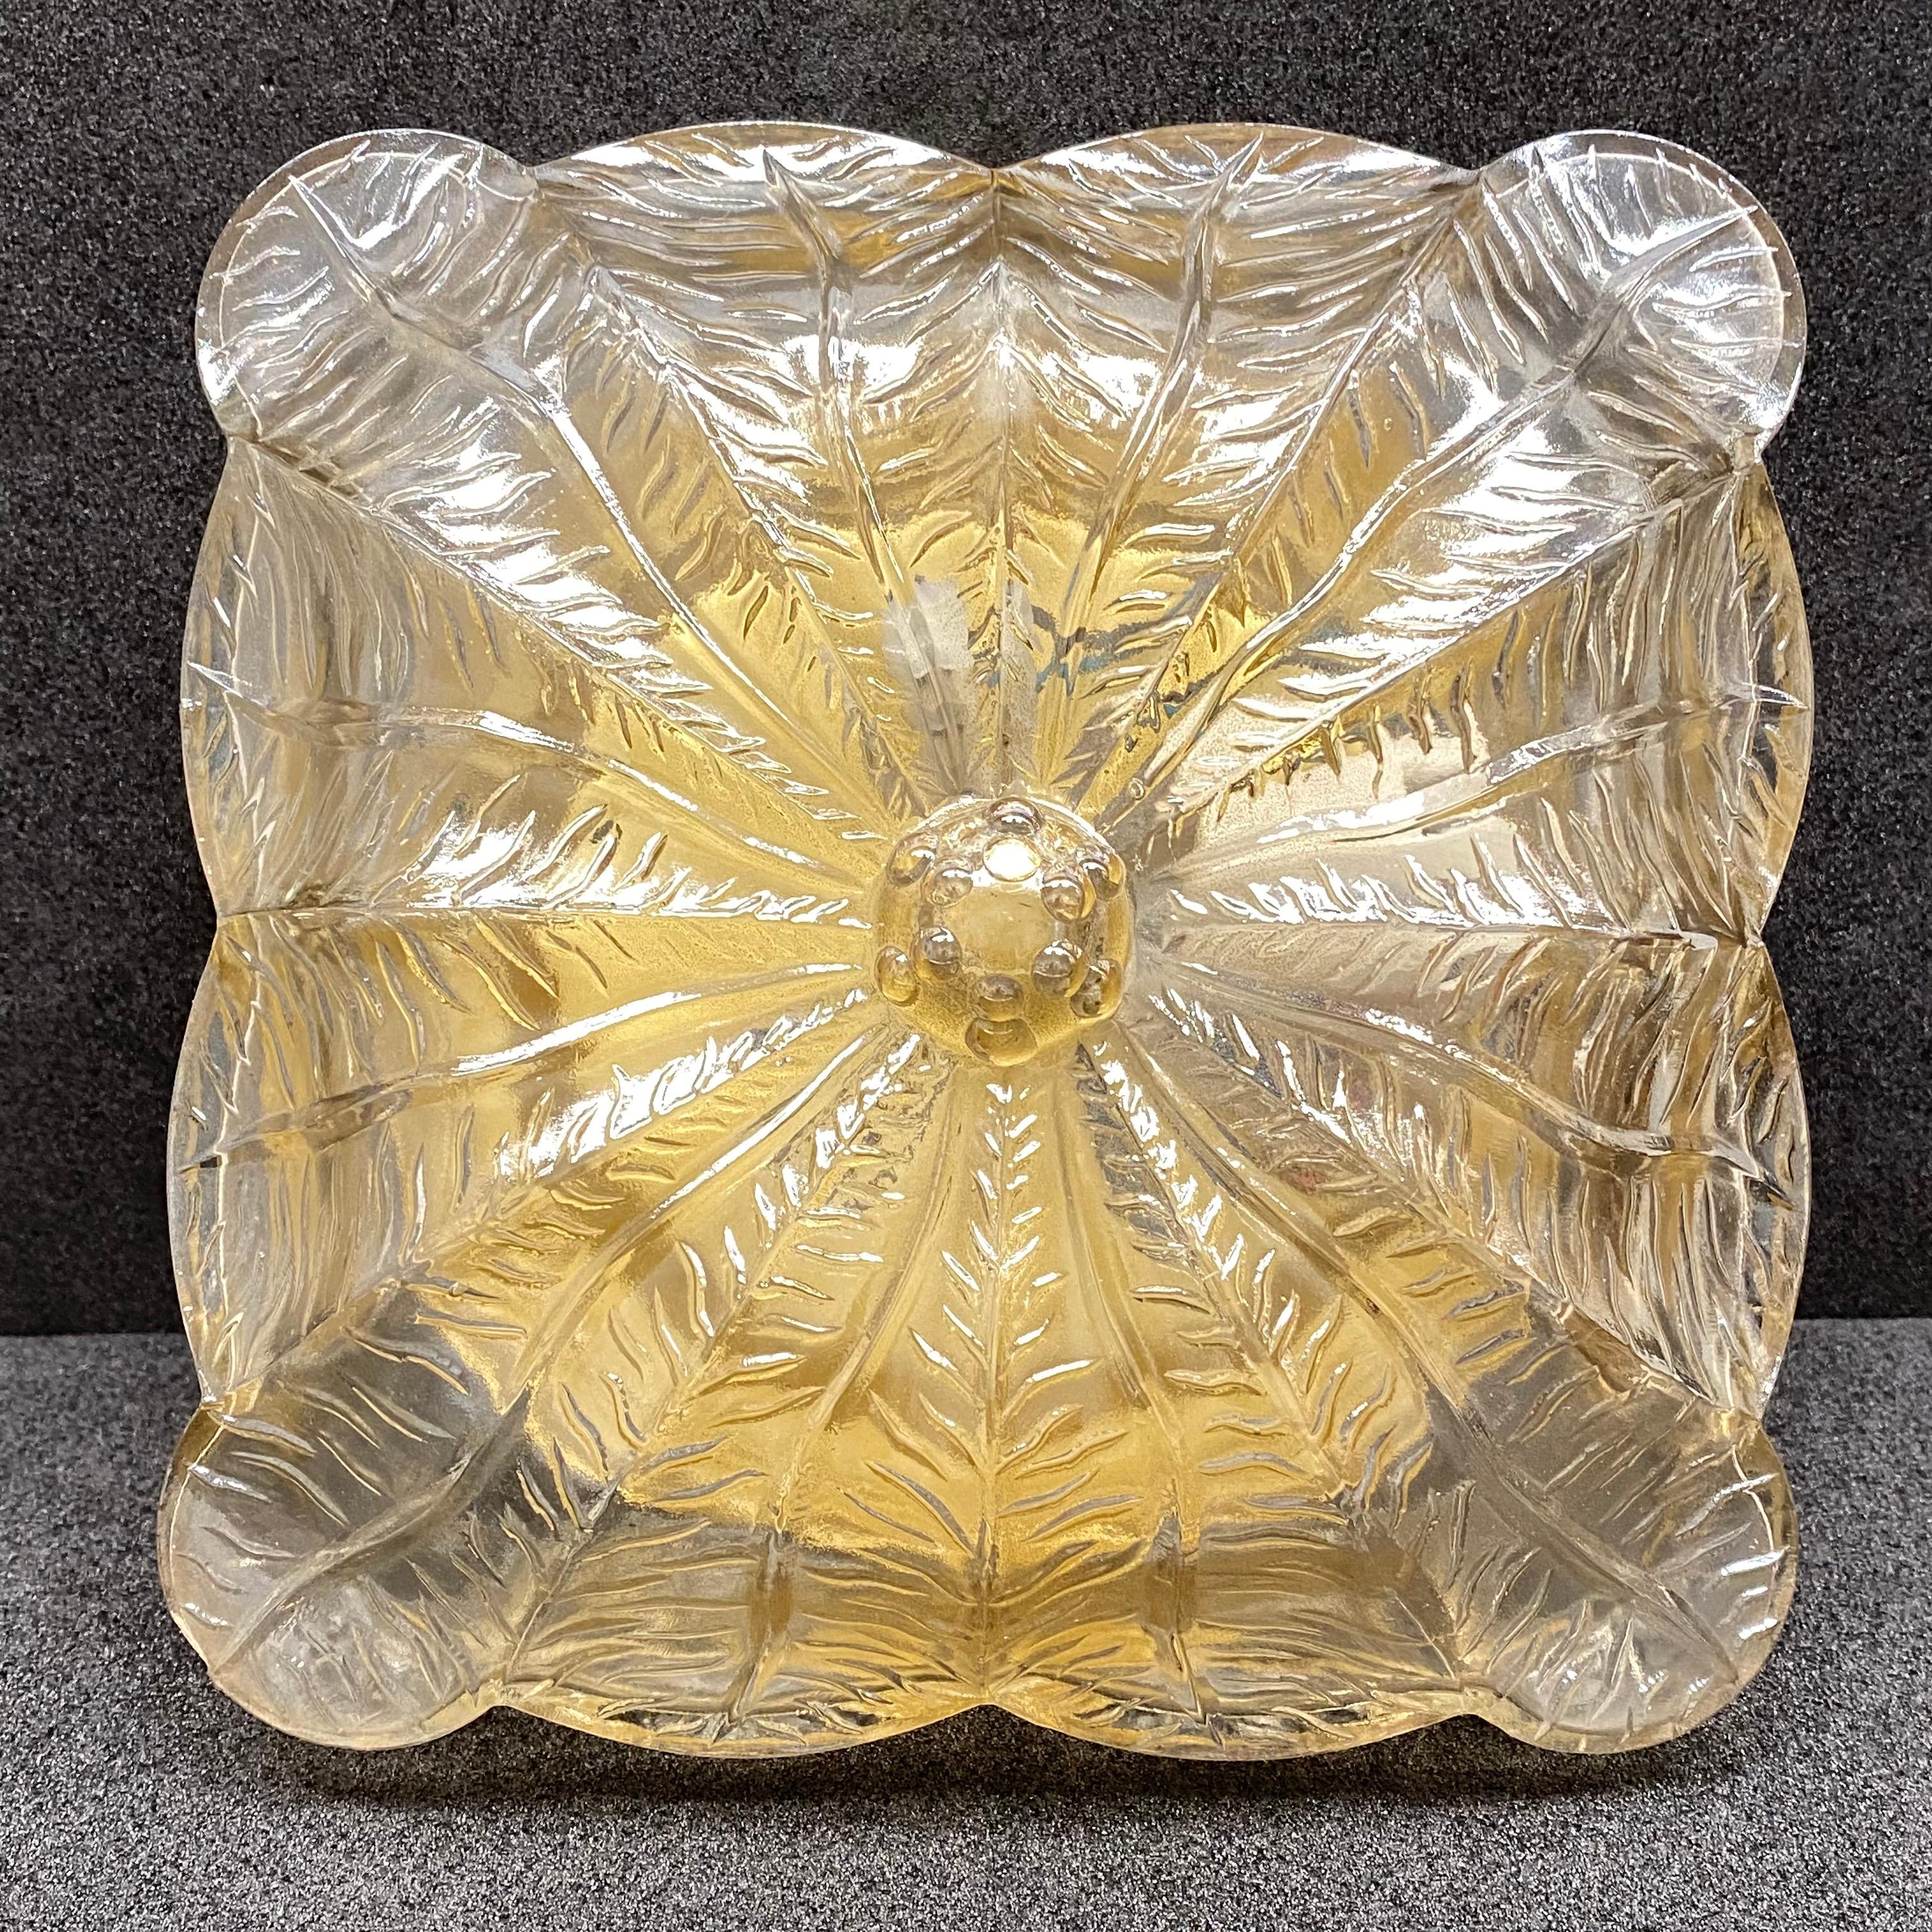 Beautiful leaf shape flush mount. Made in Germany in the 1960s. Gorgeous textured glass flush mount with metal fixture. The glass has a very cute design. The fixture requires one European E27 / 110 Volt Edison bulb, up to 60 watts.